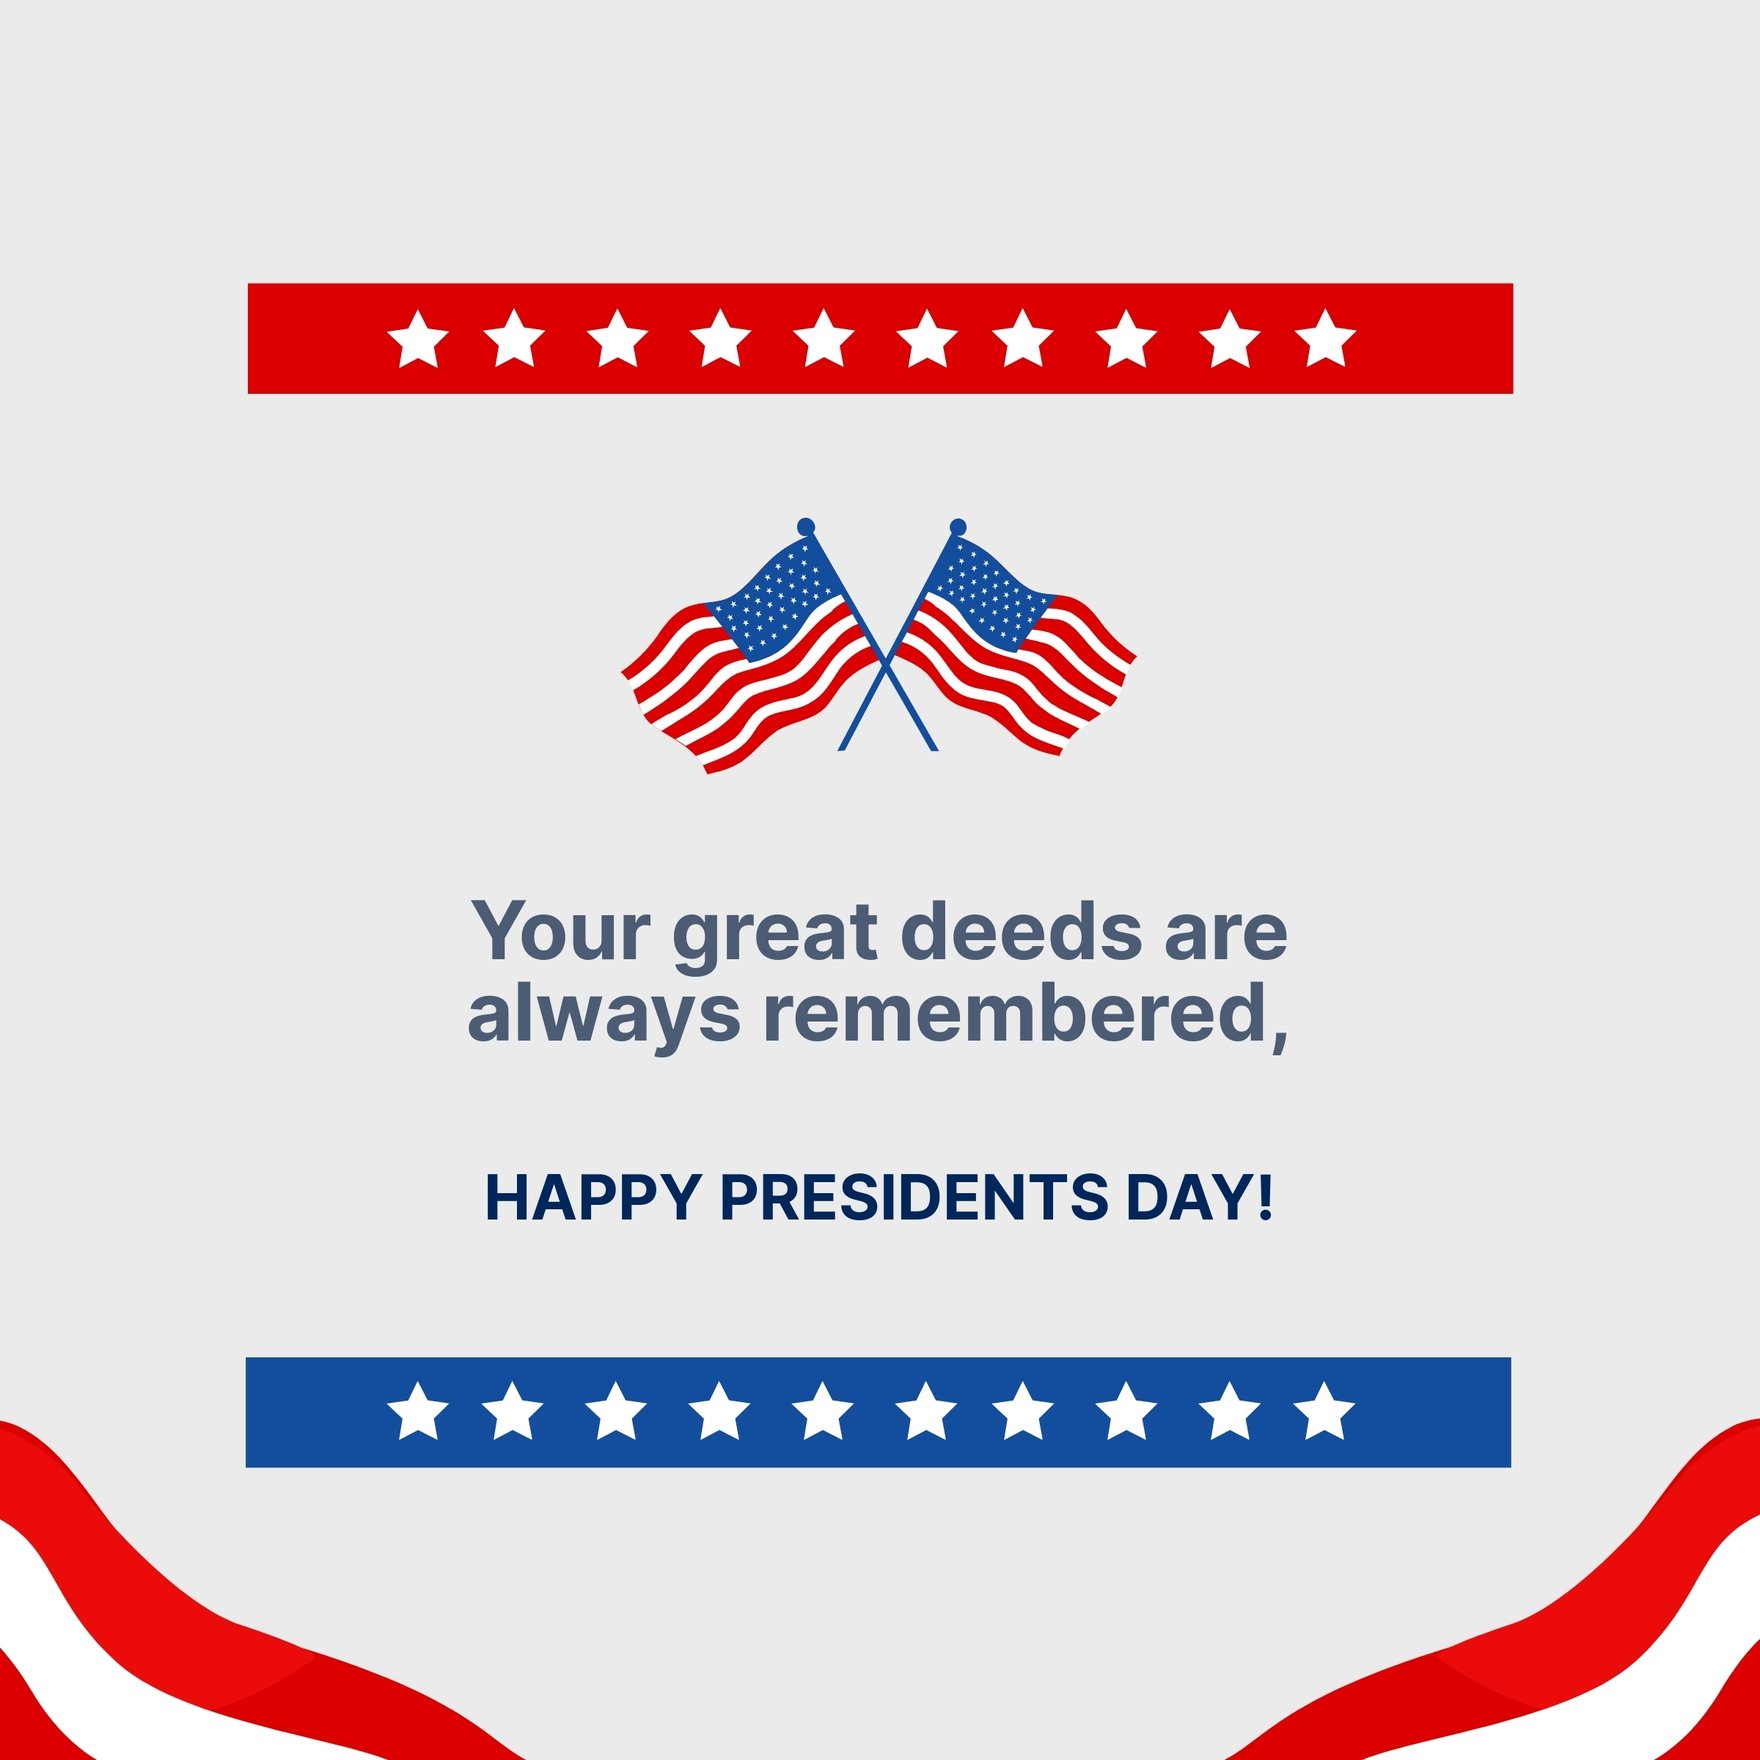 Free Presidents' Day Whatsapp Post in Illustrator, PSD, EPS, SVG, PNG, JPEG